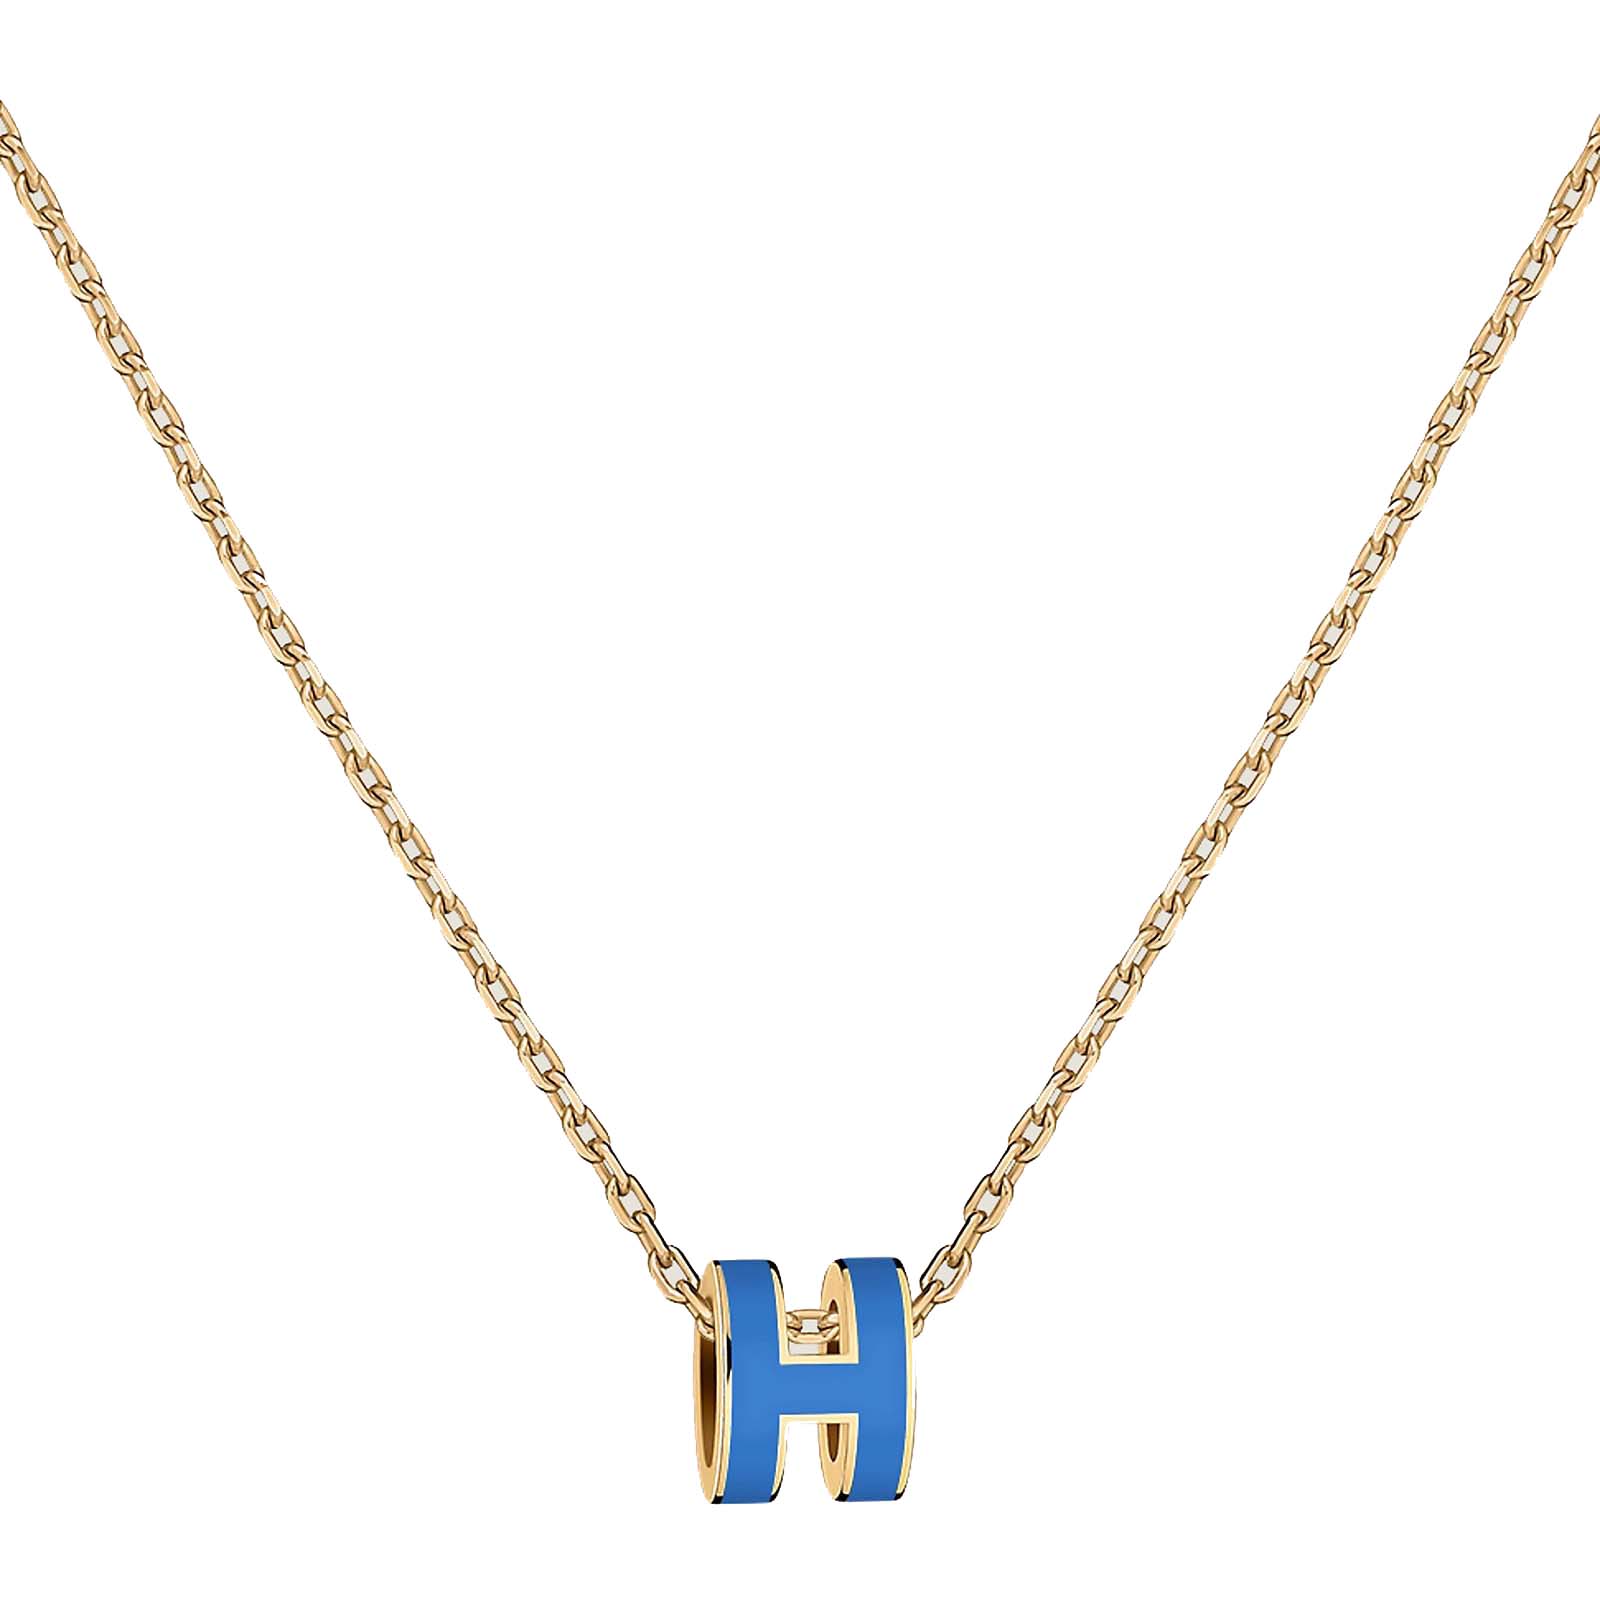 Hermes Mini Pop H Pendant Bleu Sature in Lacquered Metal with Gold